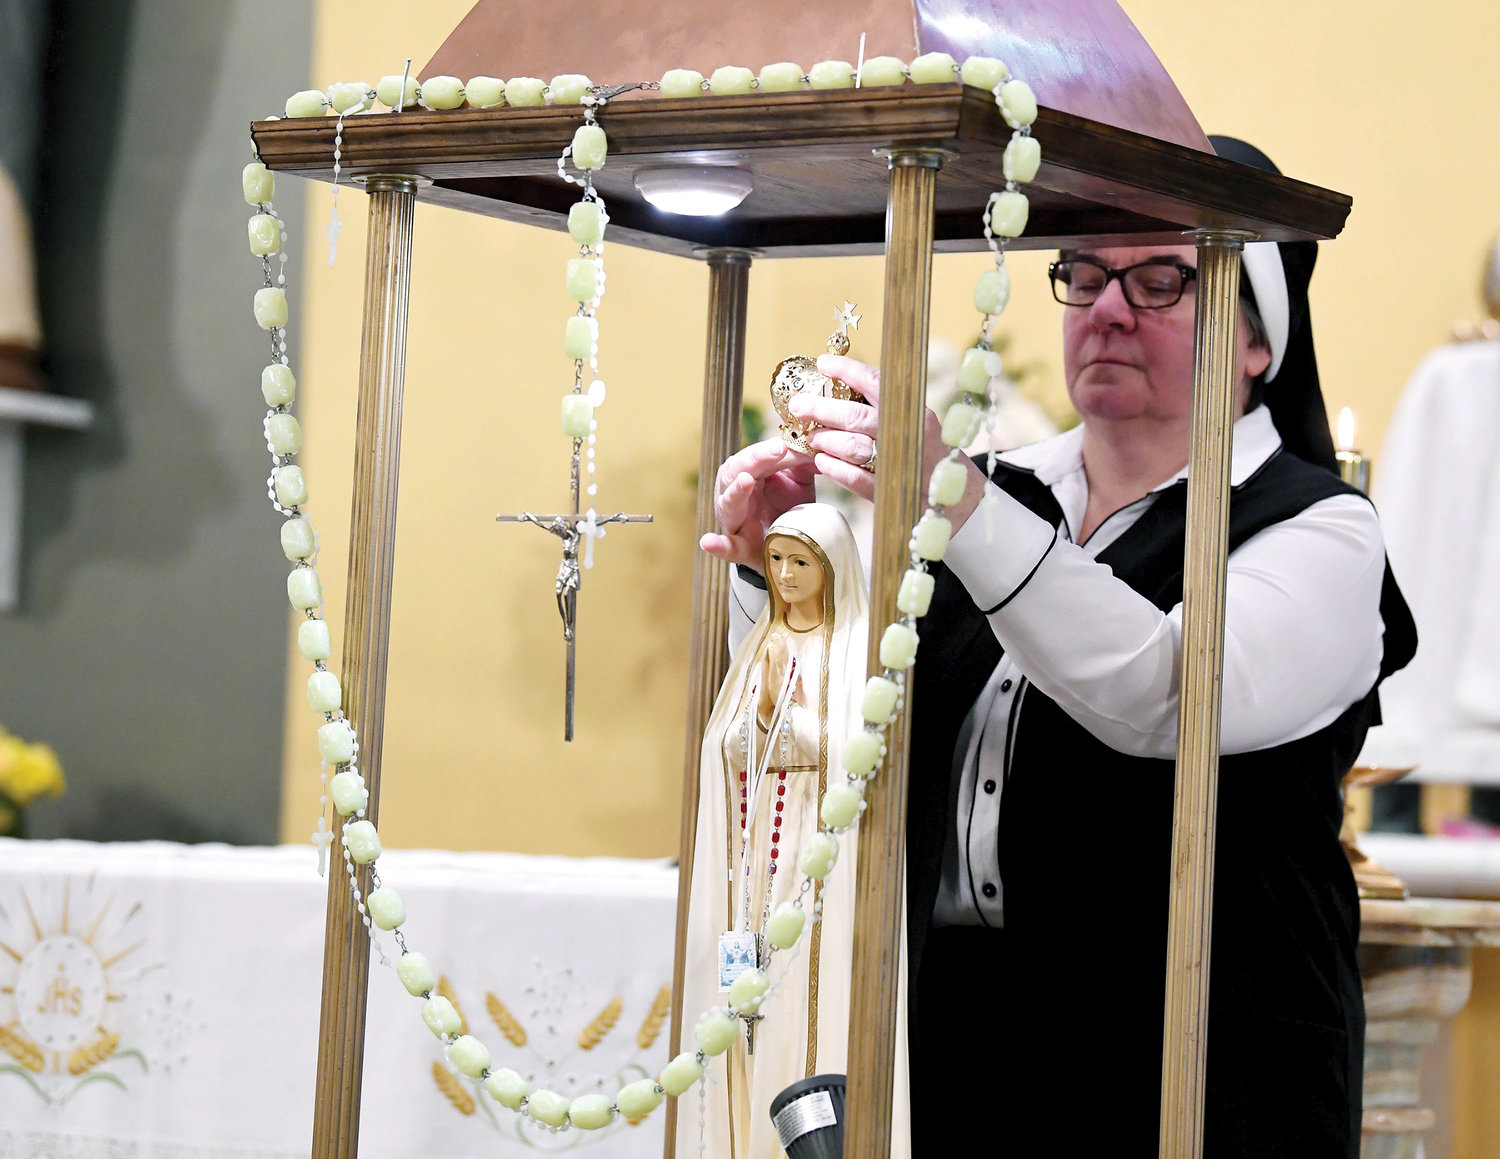 Sister Antonia Zuffante, C.S.JB., crowns a figure of Our Lady of Fatima on her feast day, May 13, in the sanctuary of Our Lady Help of Christians Church on Staten Island. Father Jeffrey Pomeisl, chaplain at Msgr. Farrell High School, led a Rosary rally involving a number of Staten Island Catholic school educators including Sister Antonia, who chairs the religion department at Msgr. Farrell. The rally, #MillionRosaryMay13th, drew many viewers to Father Pomeisl’s YouTube “Pomcast.”